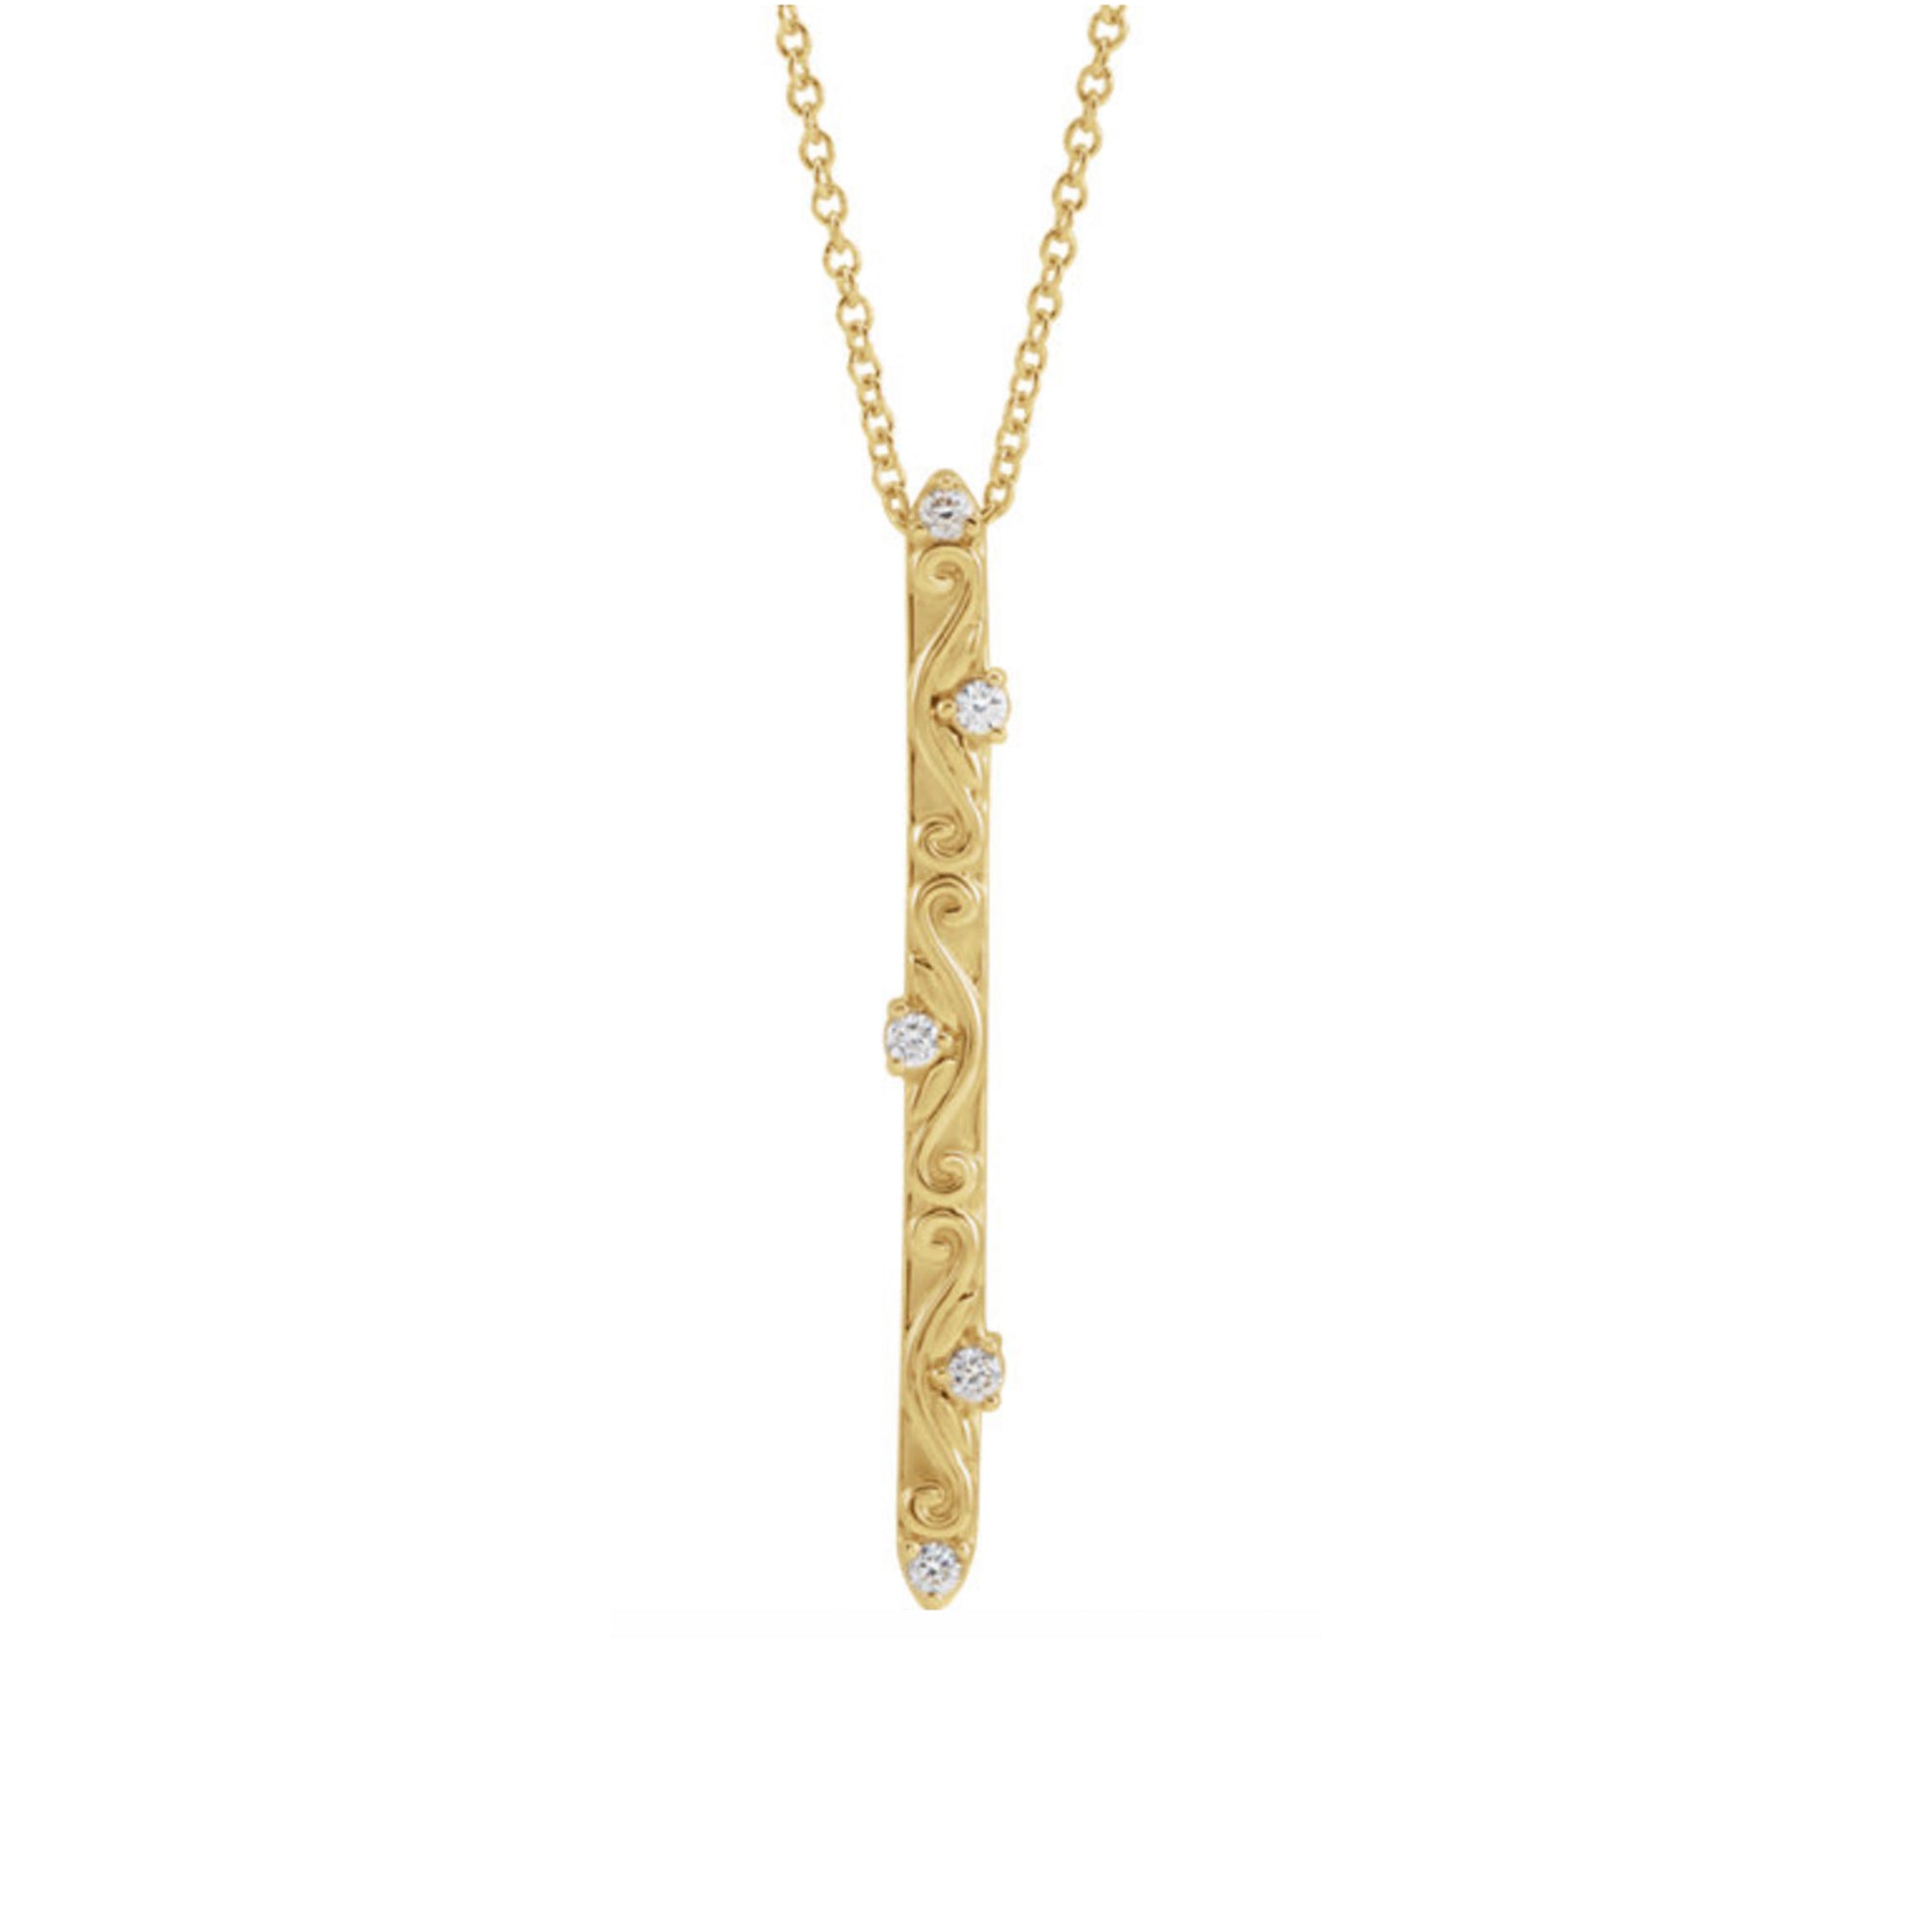 Vintage Inspired Vertical Diamond Bar Necklace - Talisman Collection Fine Jewelers